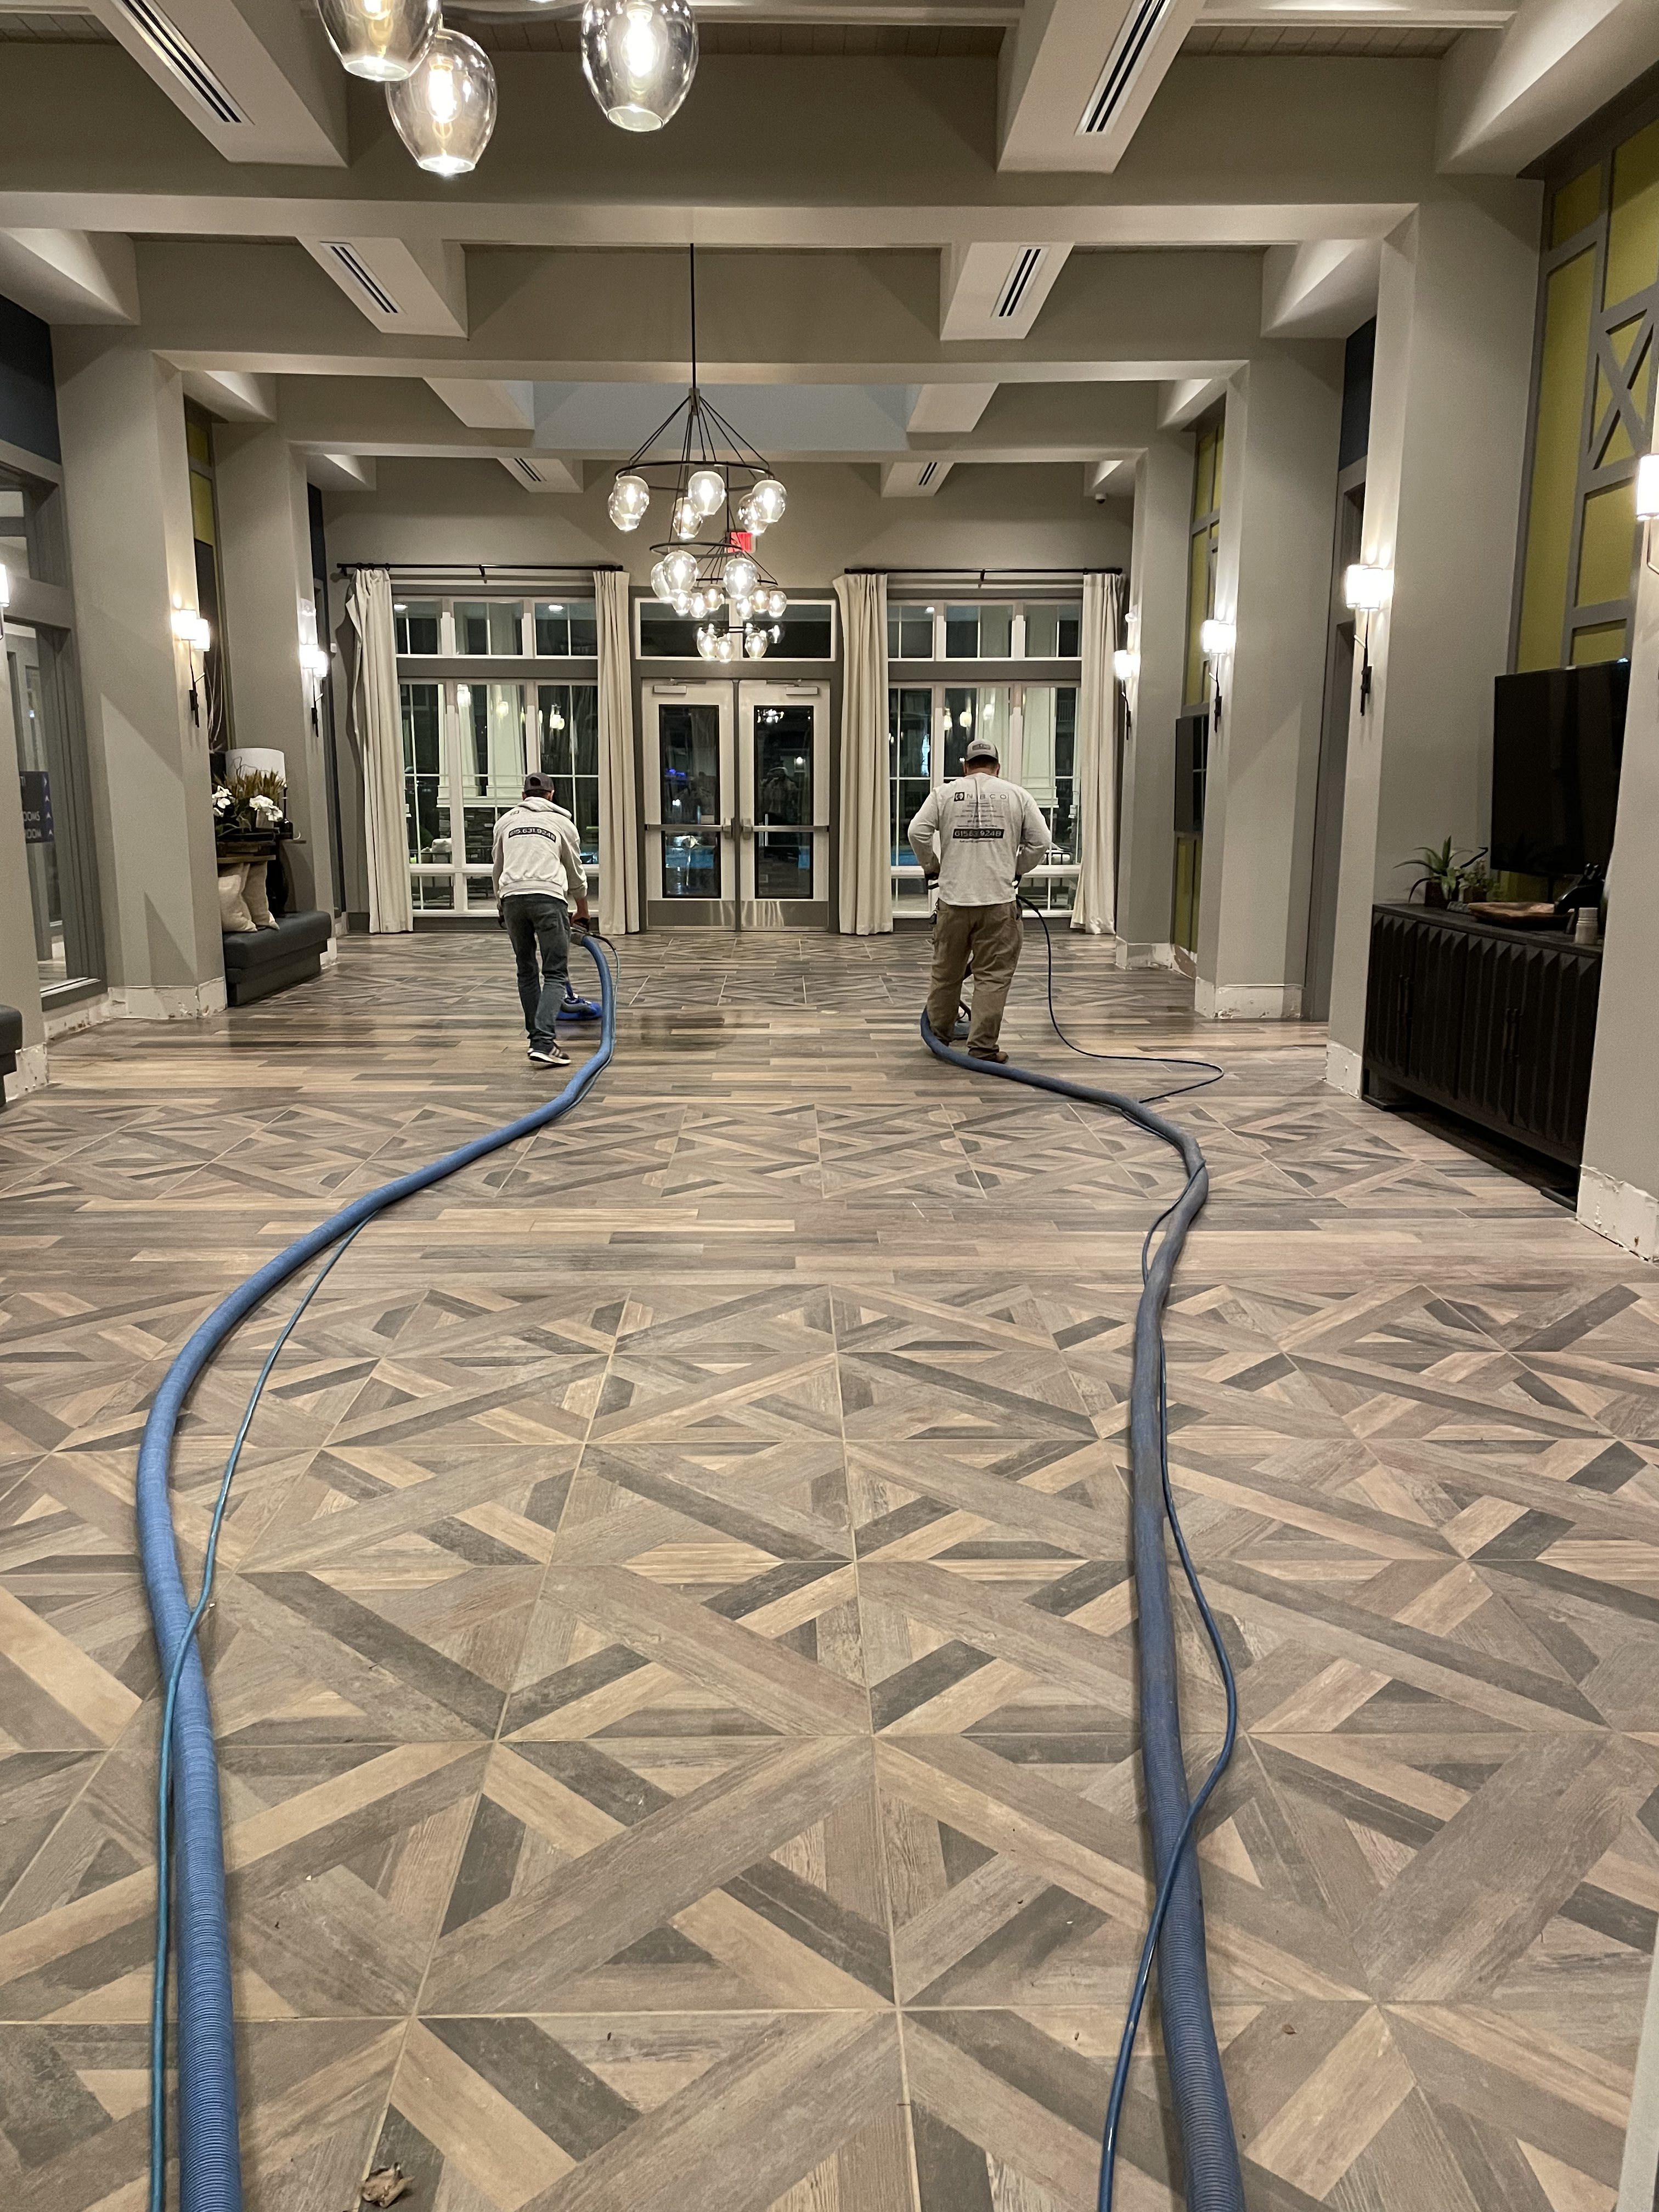 Two people cleaning a tiled floor with hoses in a well-lit lobby with hanging lights and a seating area.